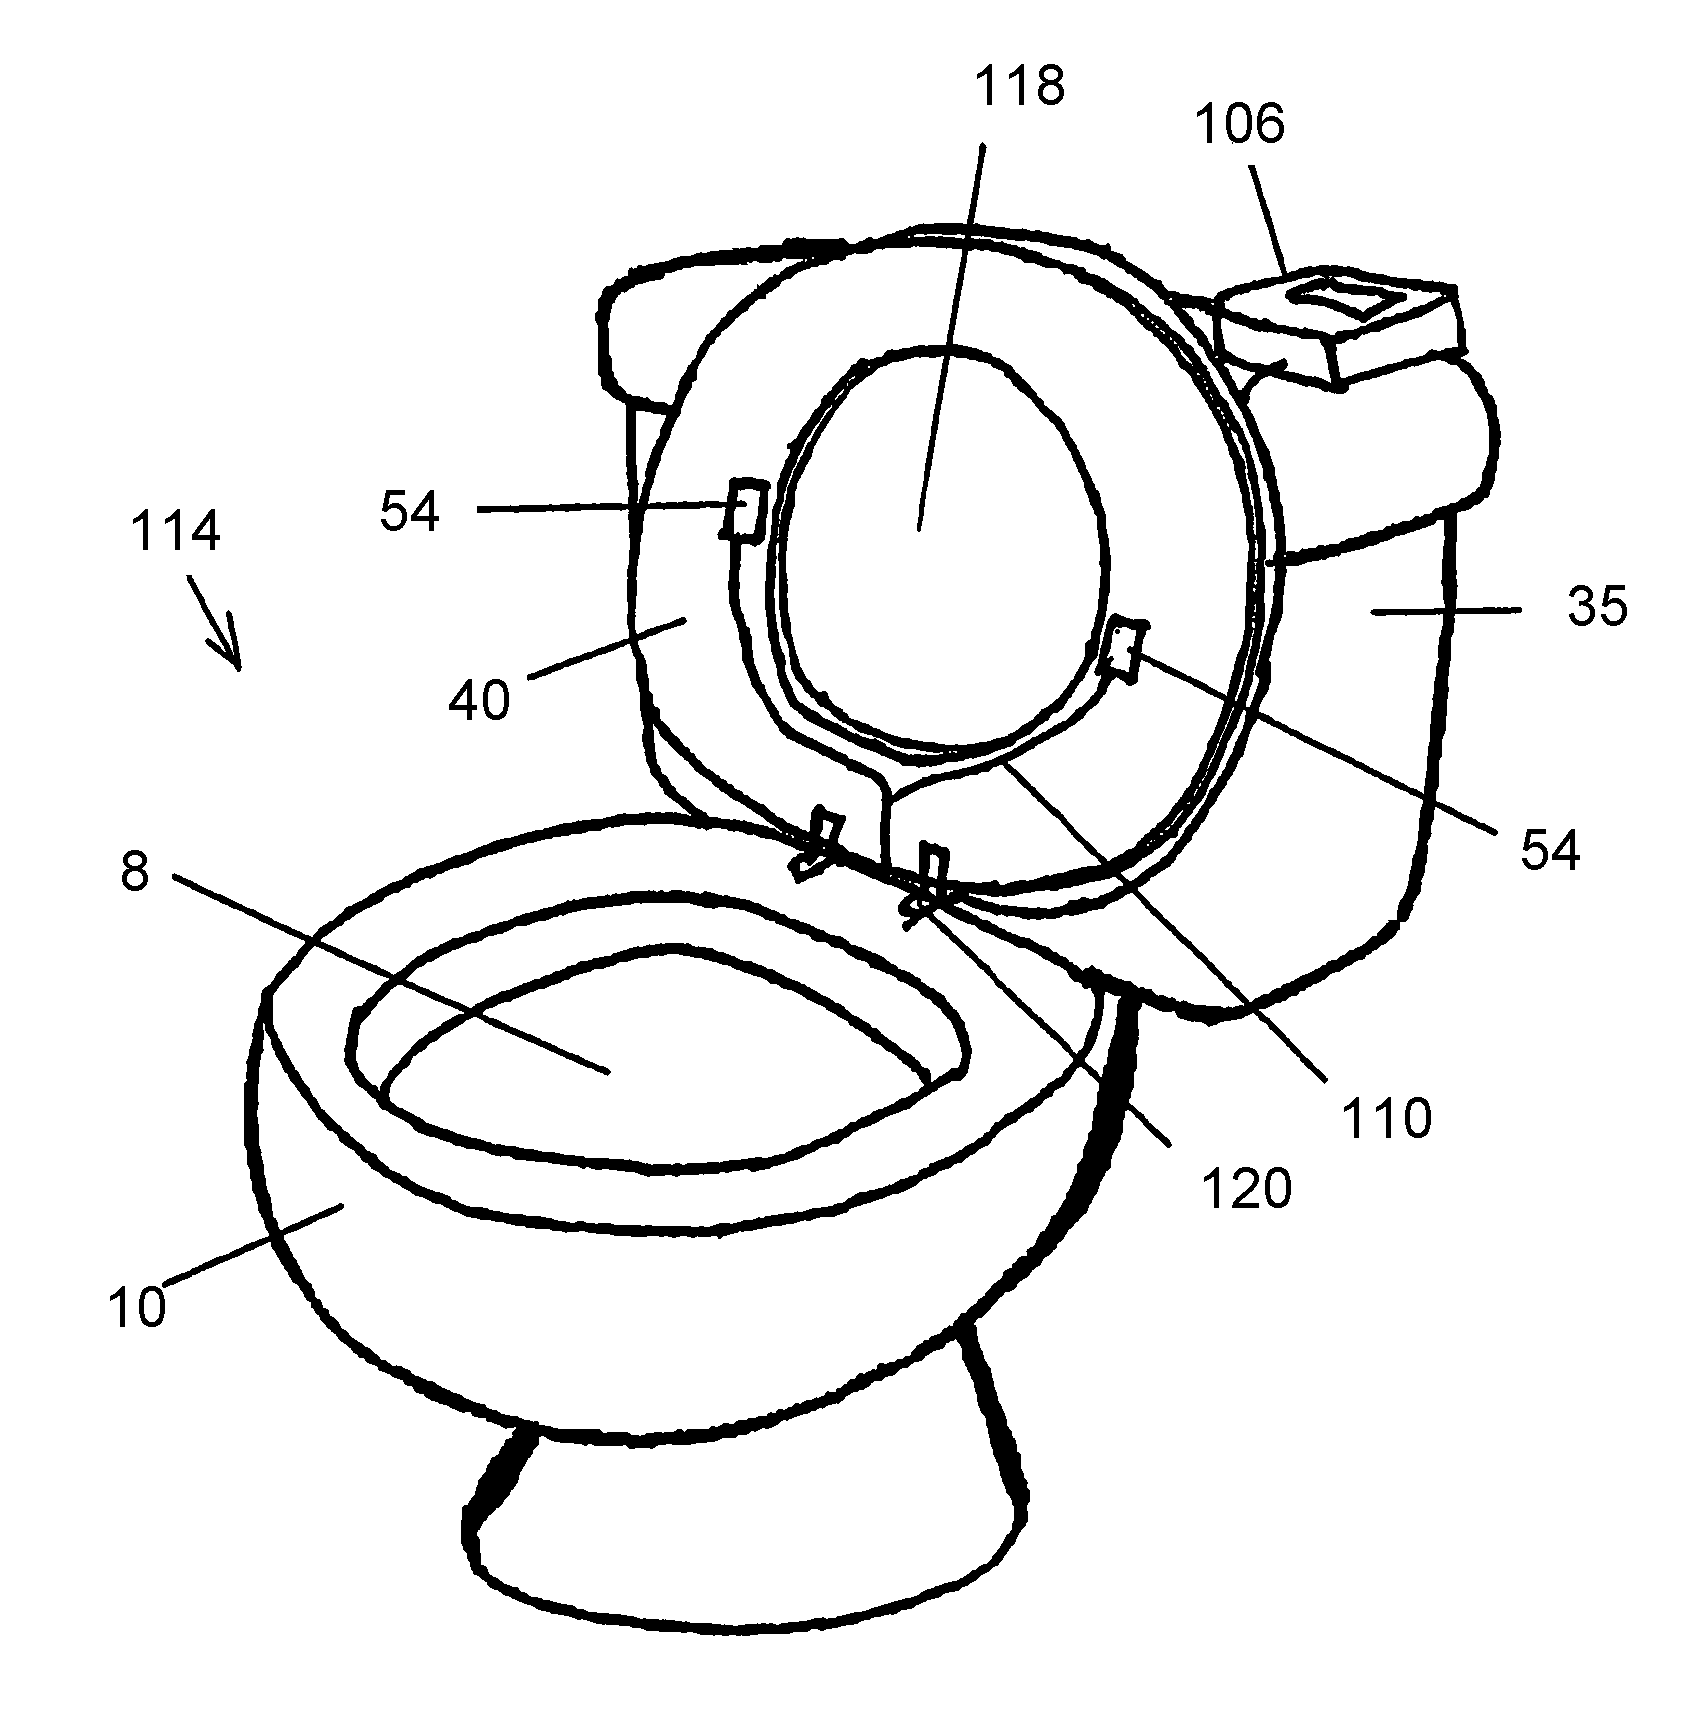 Apparatus and method for the remote sensing of blood in human feces and urine